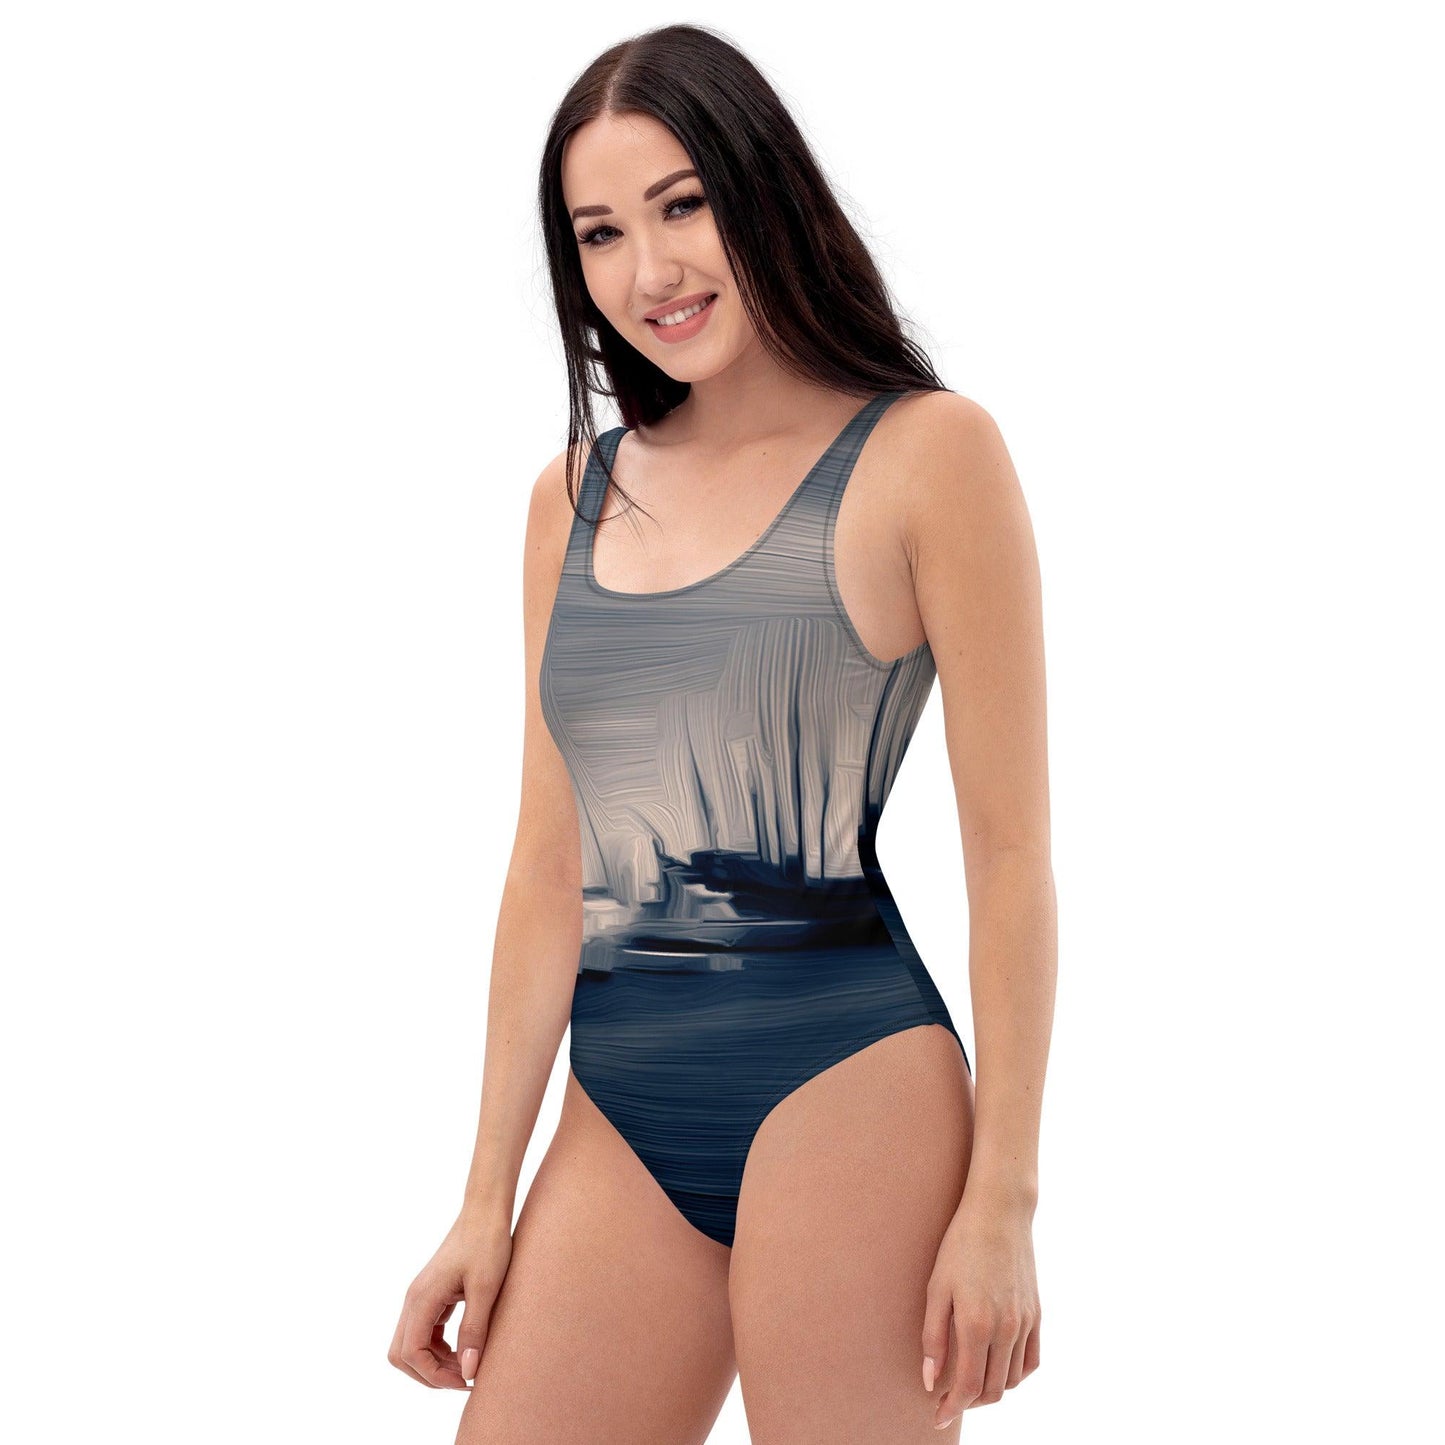 The Sleeping Yachts (at Sunrise) - Womens One-Piece Swimsuit - iSAW Company